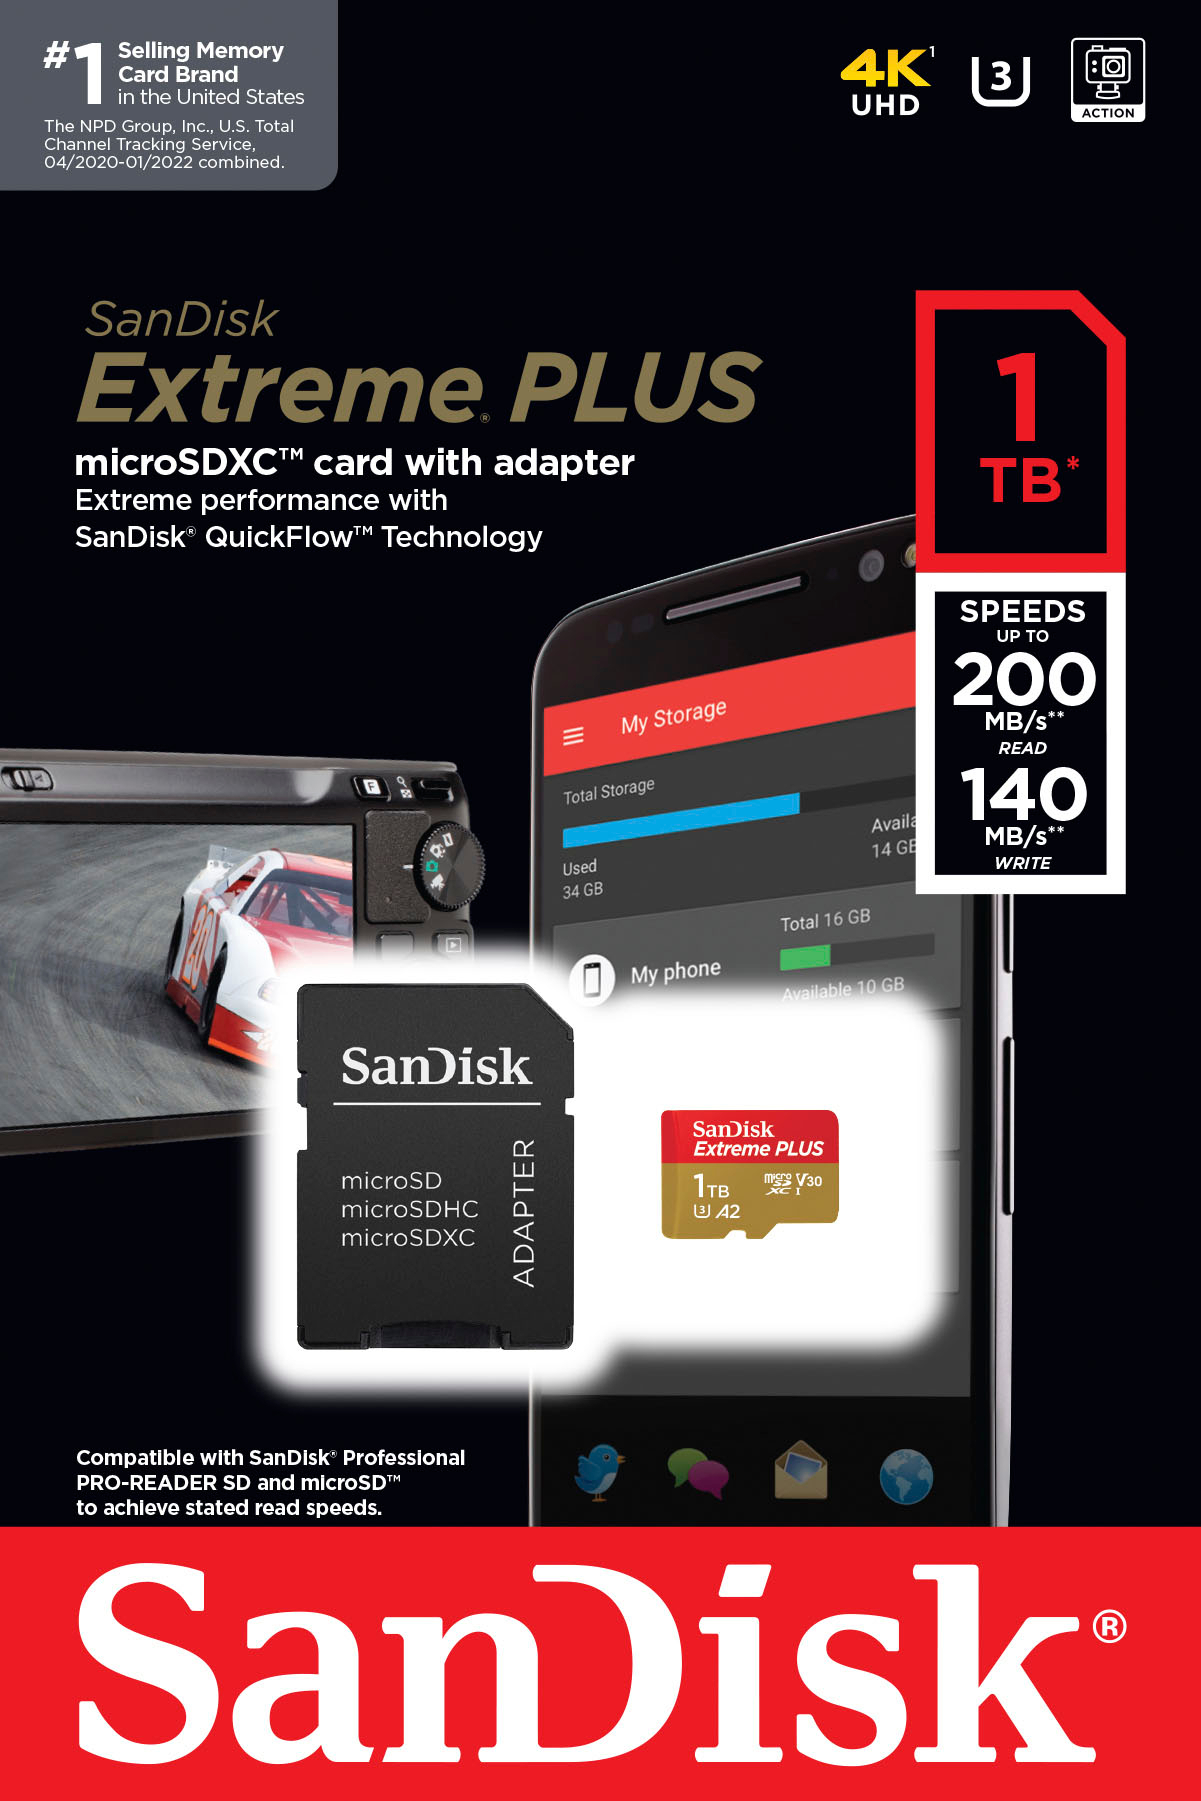 Is it me or is $99 for a 1TB micro SD card an insanely good deal